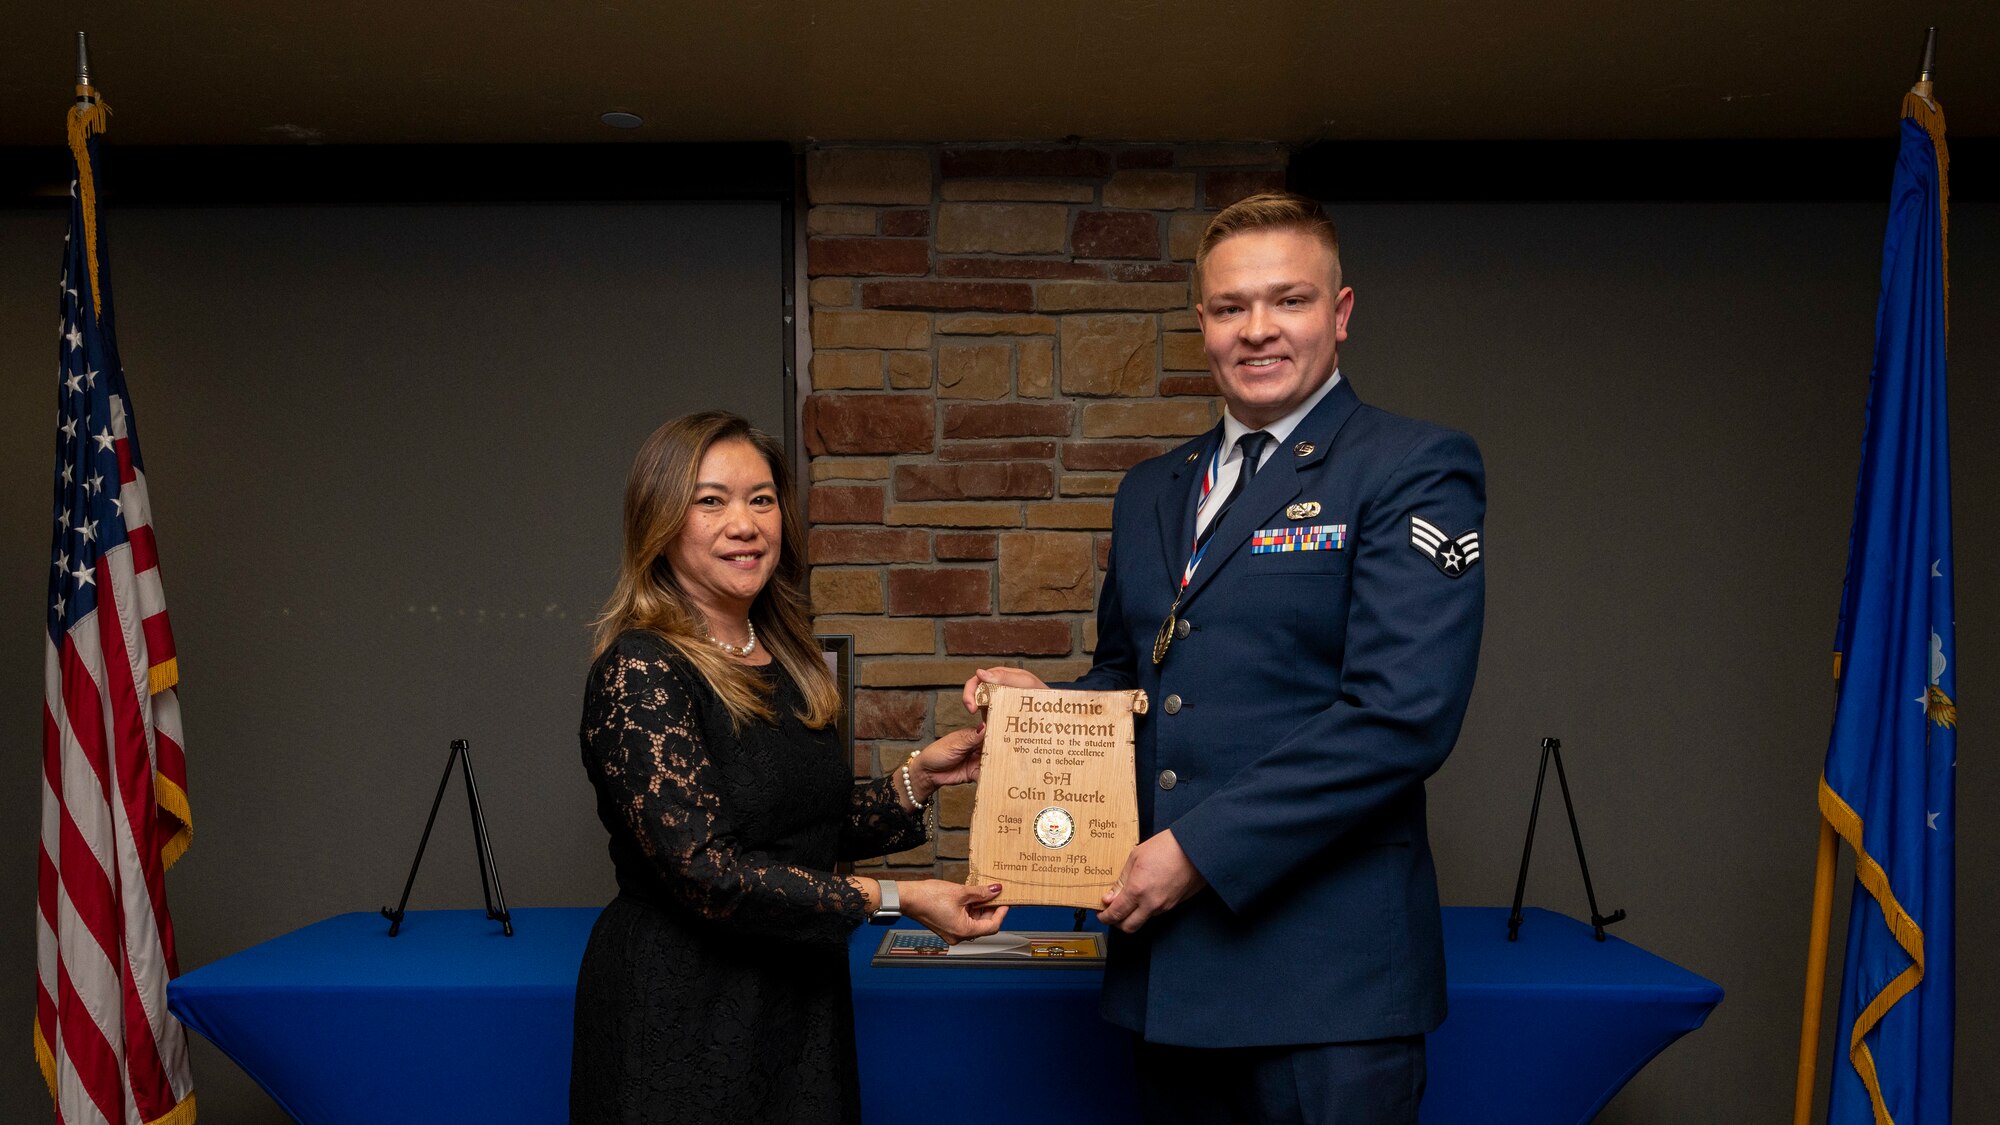 U.S. Air Force Senior Colin Bauerle, right, accepts the Academic Achievement Award from Laney Cooper, Otero Federal Credit Union representative, during an Airman Leadership School graduation at Holloman Air Force Base, New Mexico, Nov. 3, 2022.